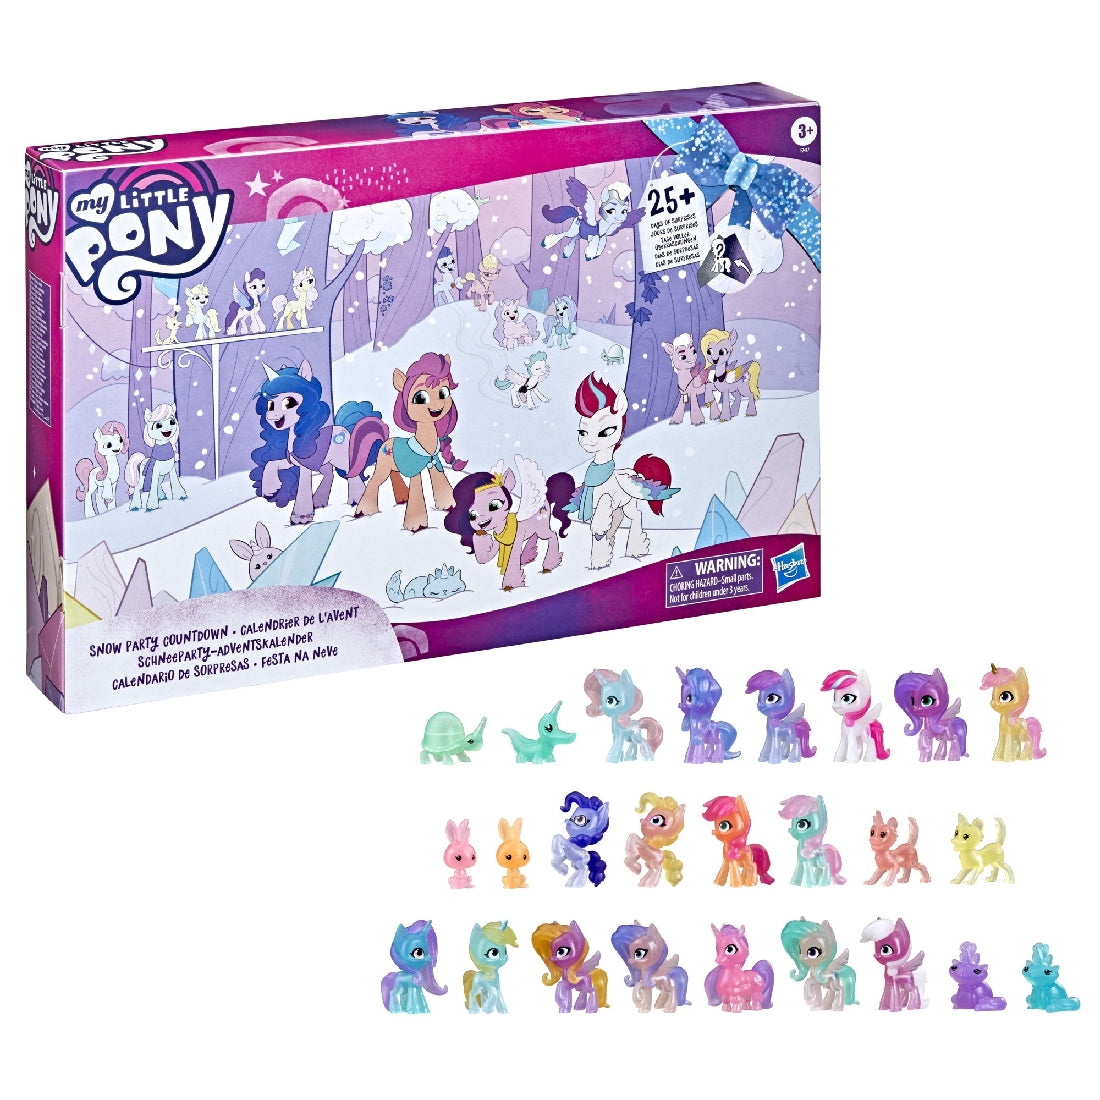 MY LITTLE PONY SNOW PARTY COUNTDOWN